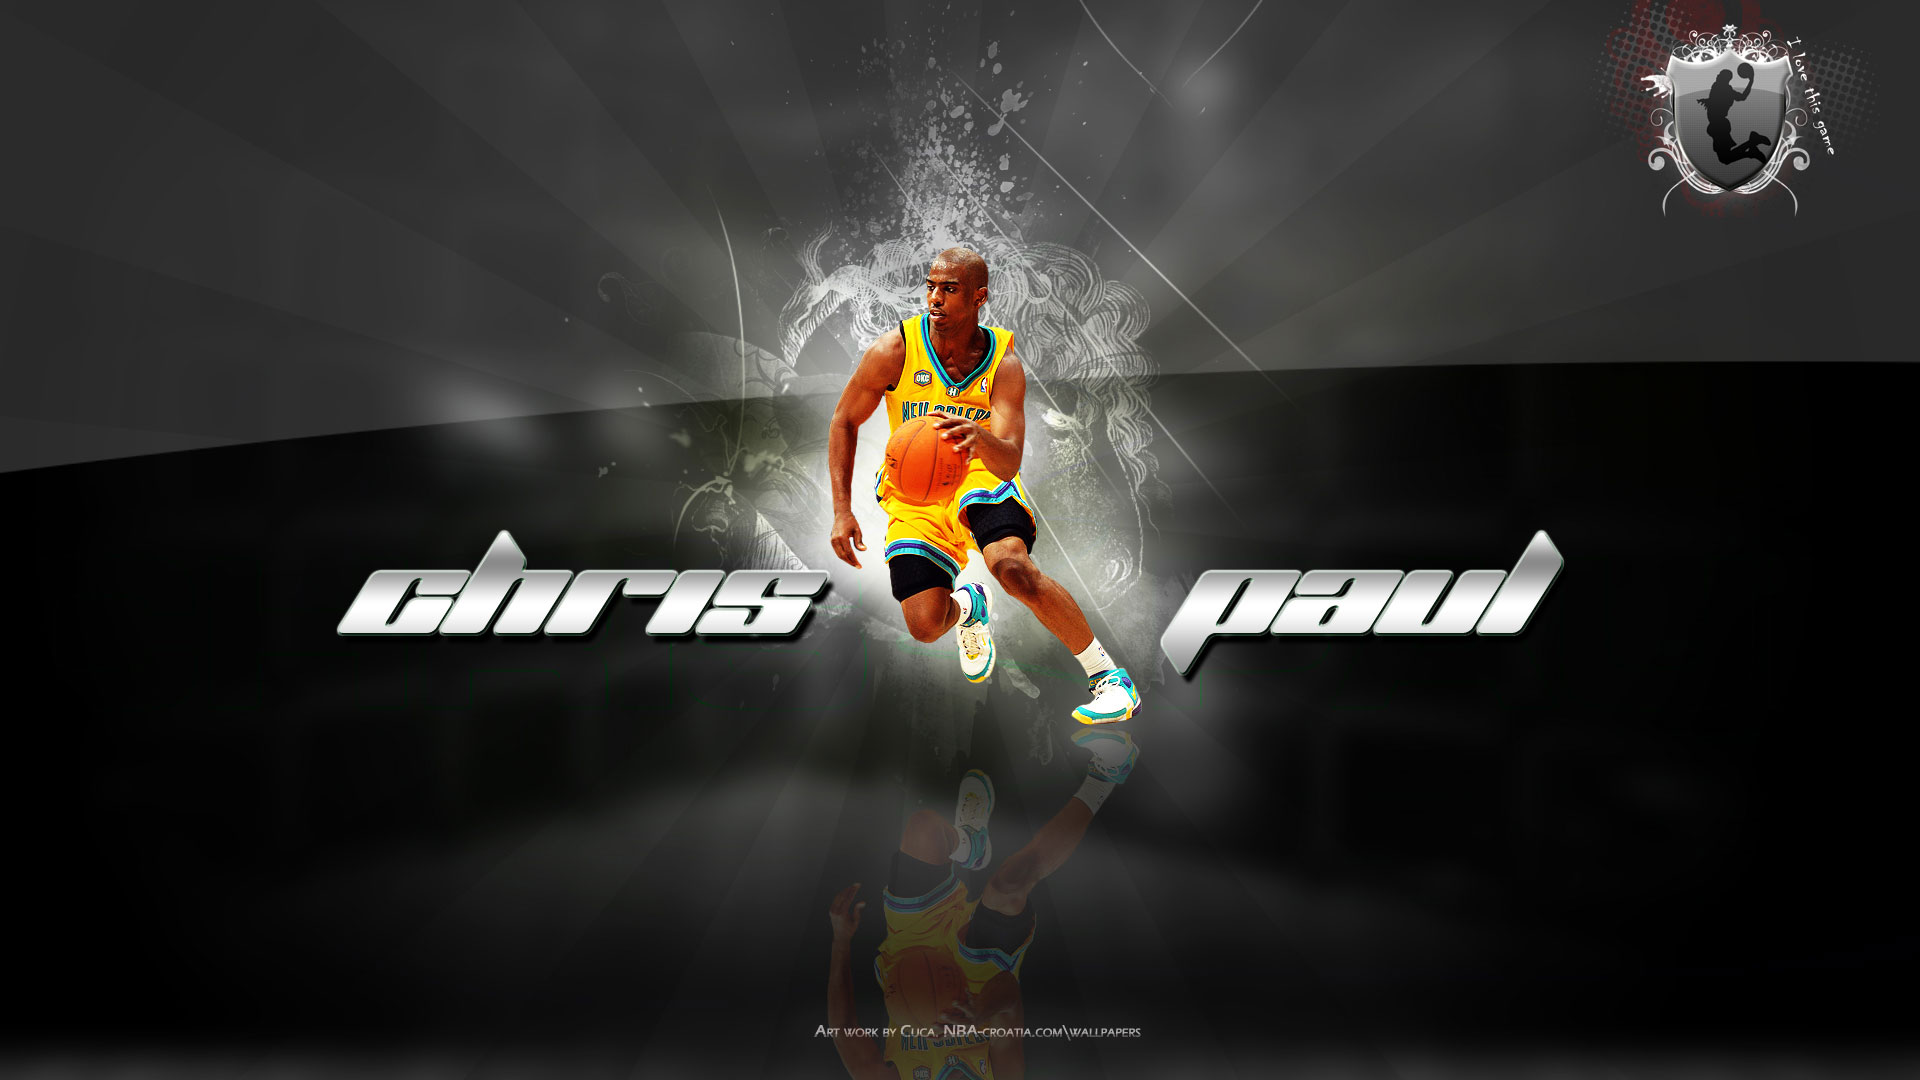 Next wallpaper will go in Chris Paul's category - it's new work of Marko 